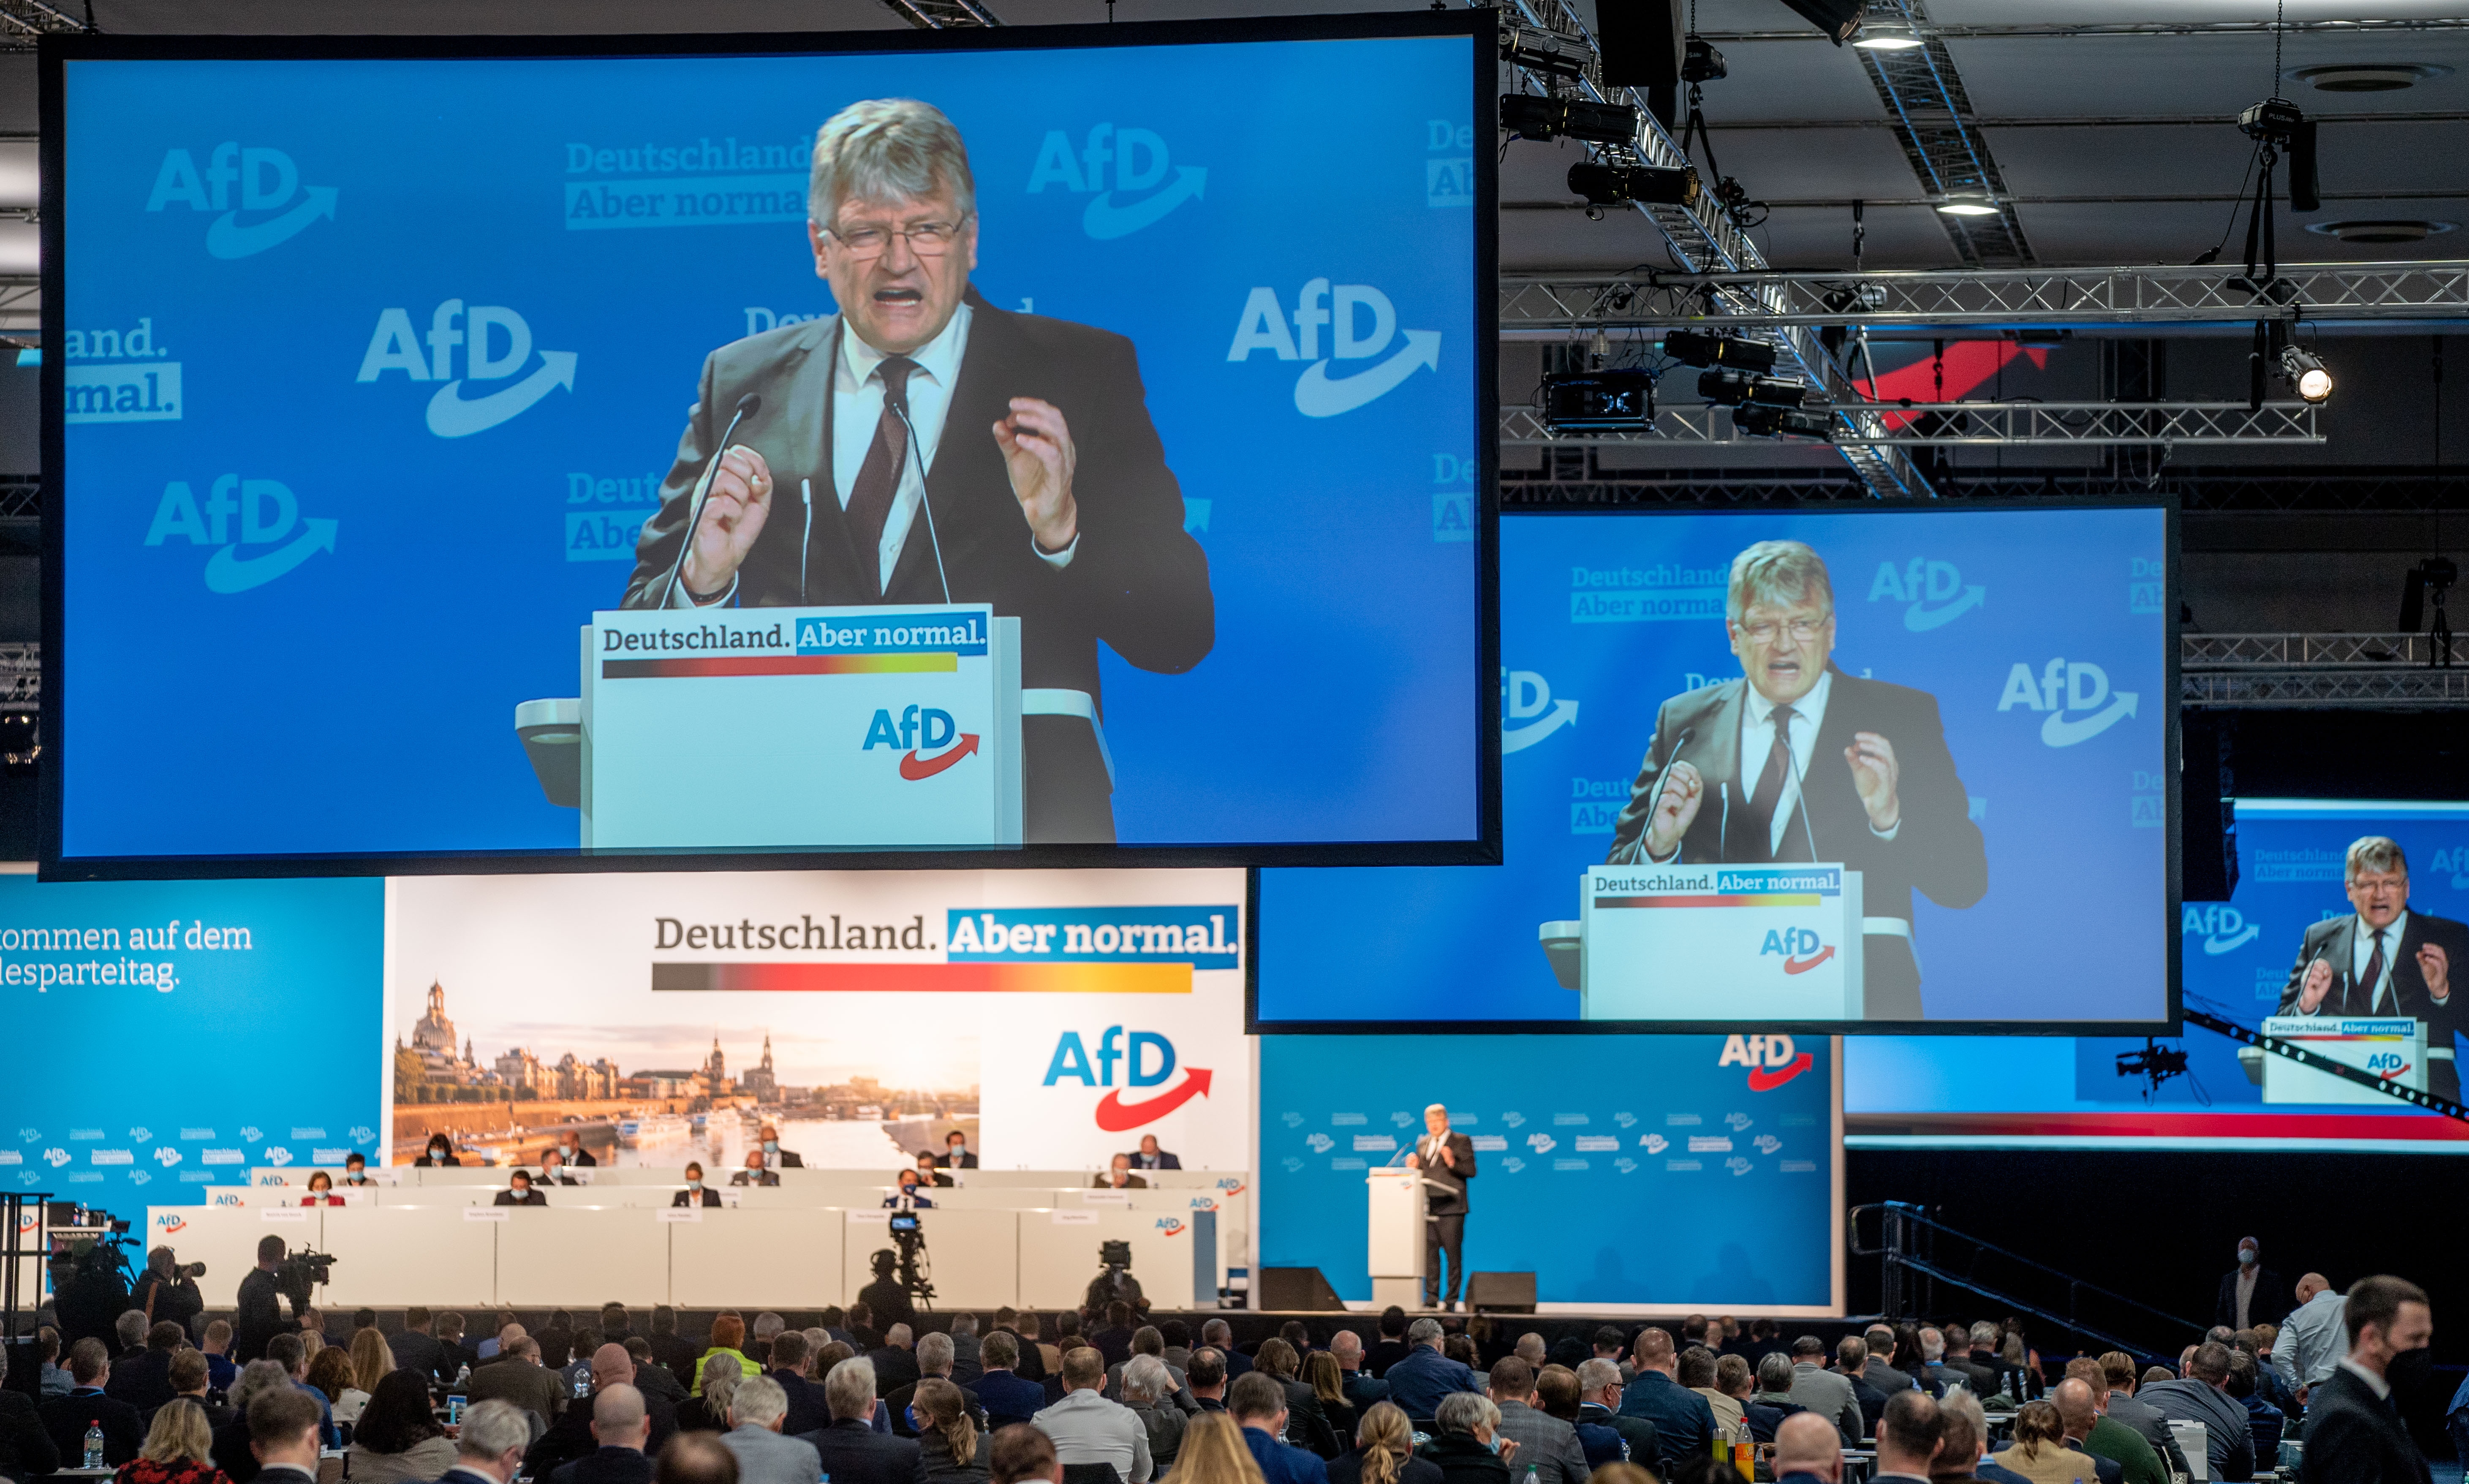 AfD-Parteitag in Dresden | dpa